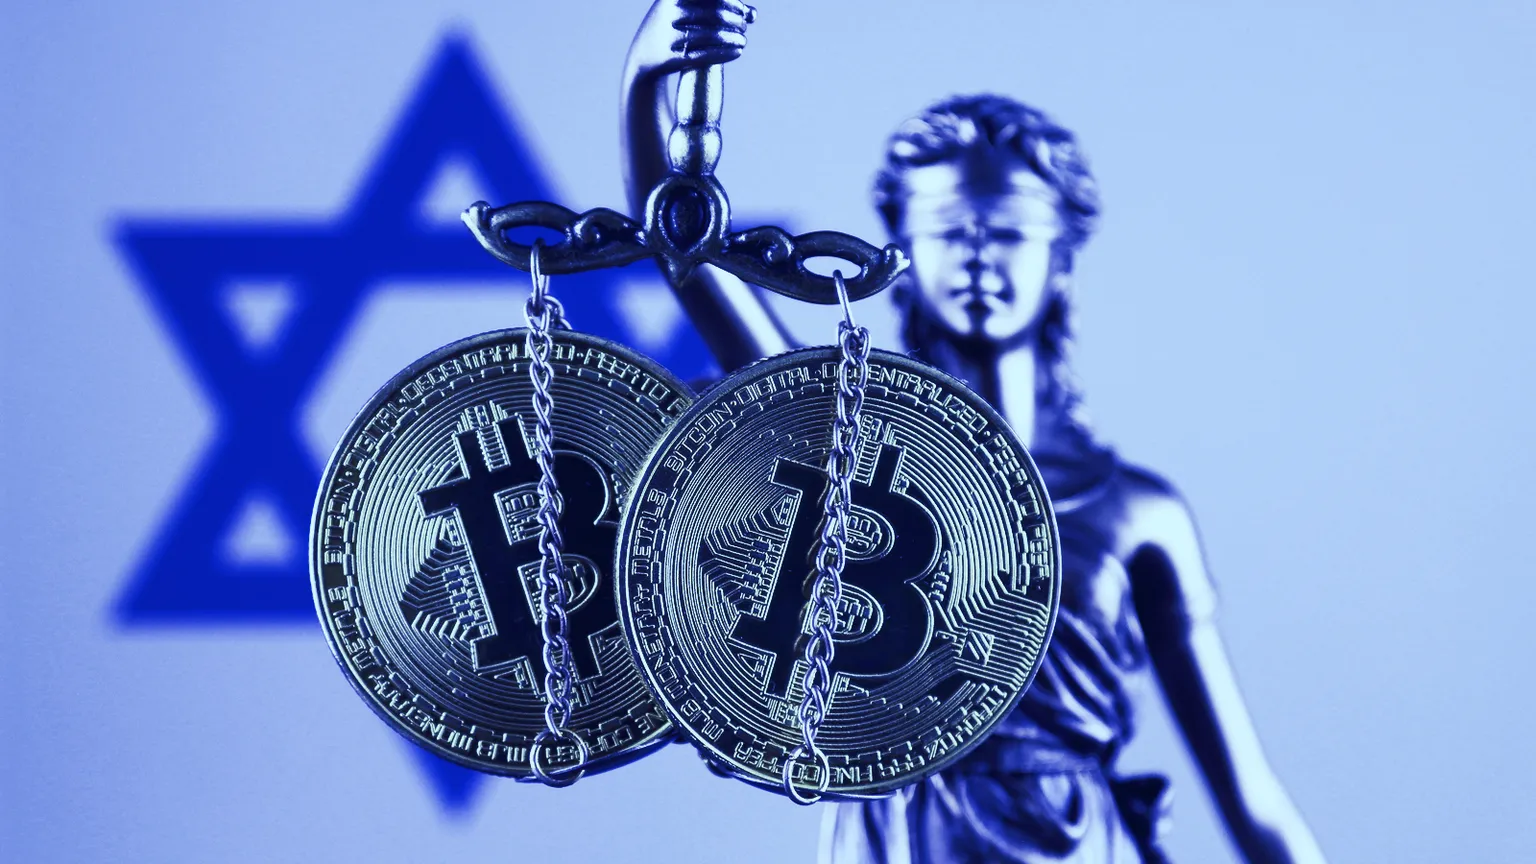 Seven crypto companies have been hit with class action lawsuits. Image: Shutterstock.